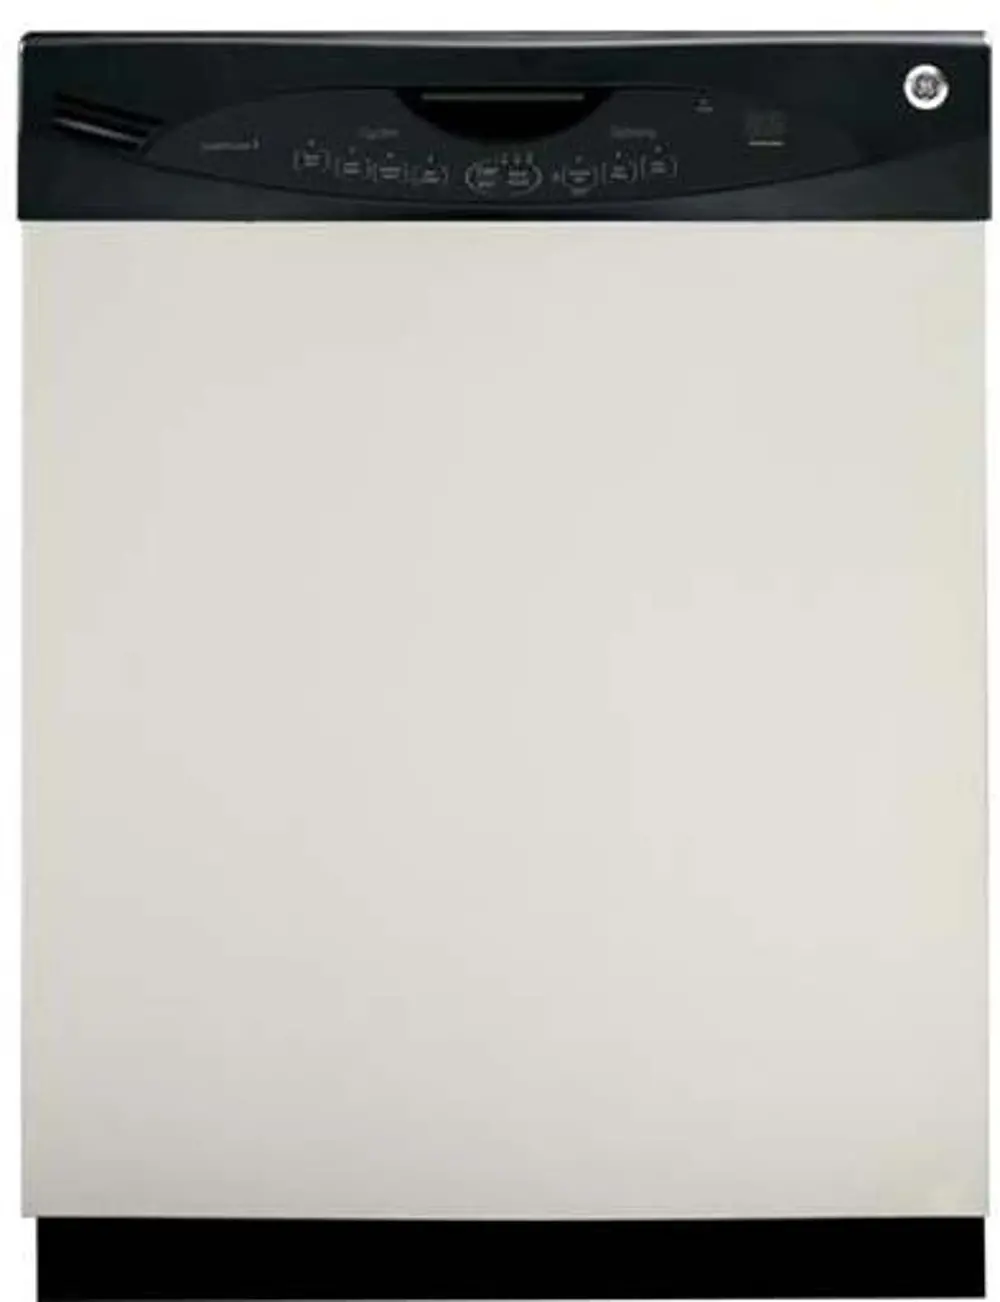 GLDA696FSS GE Front Control Dishwasher - Stainless Steel-1